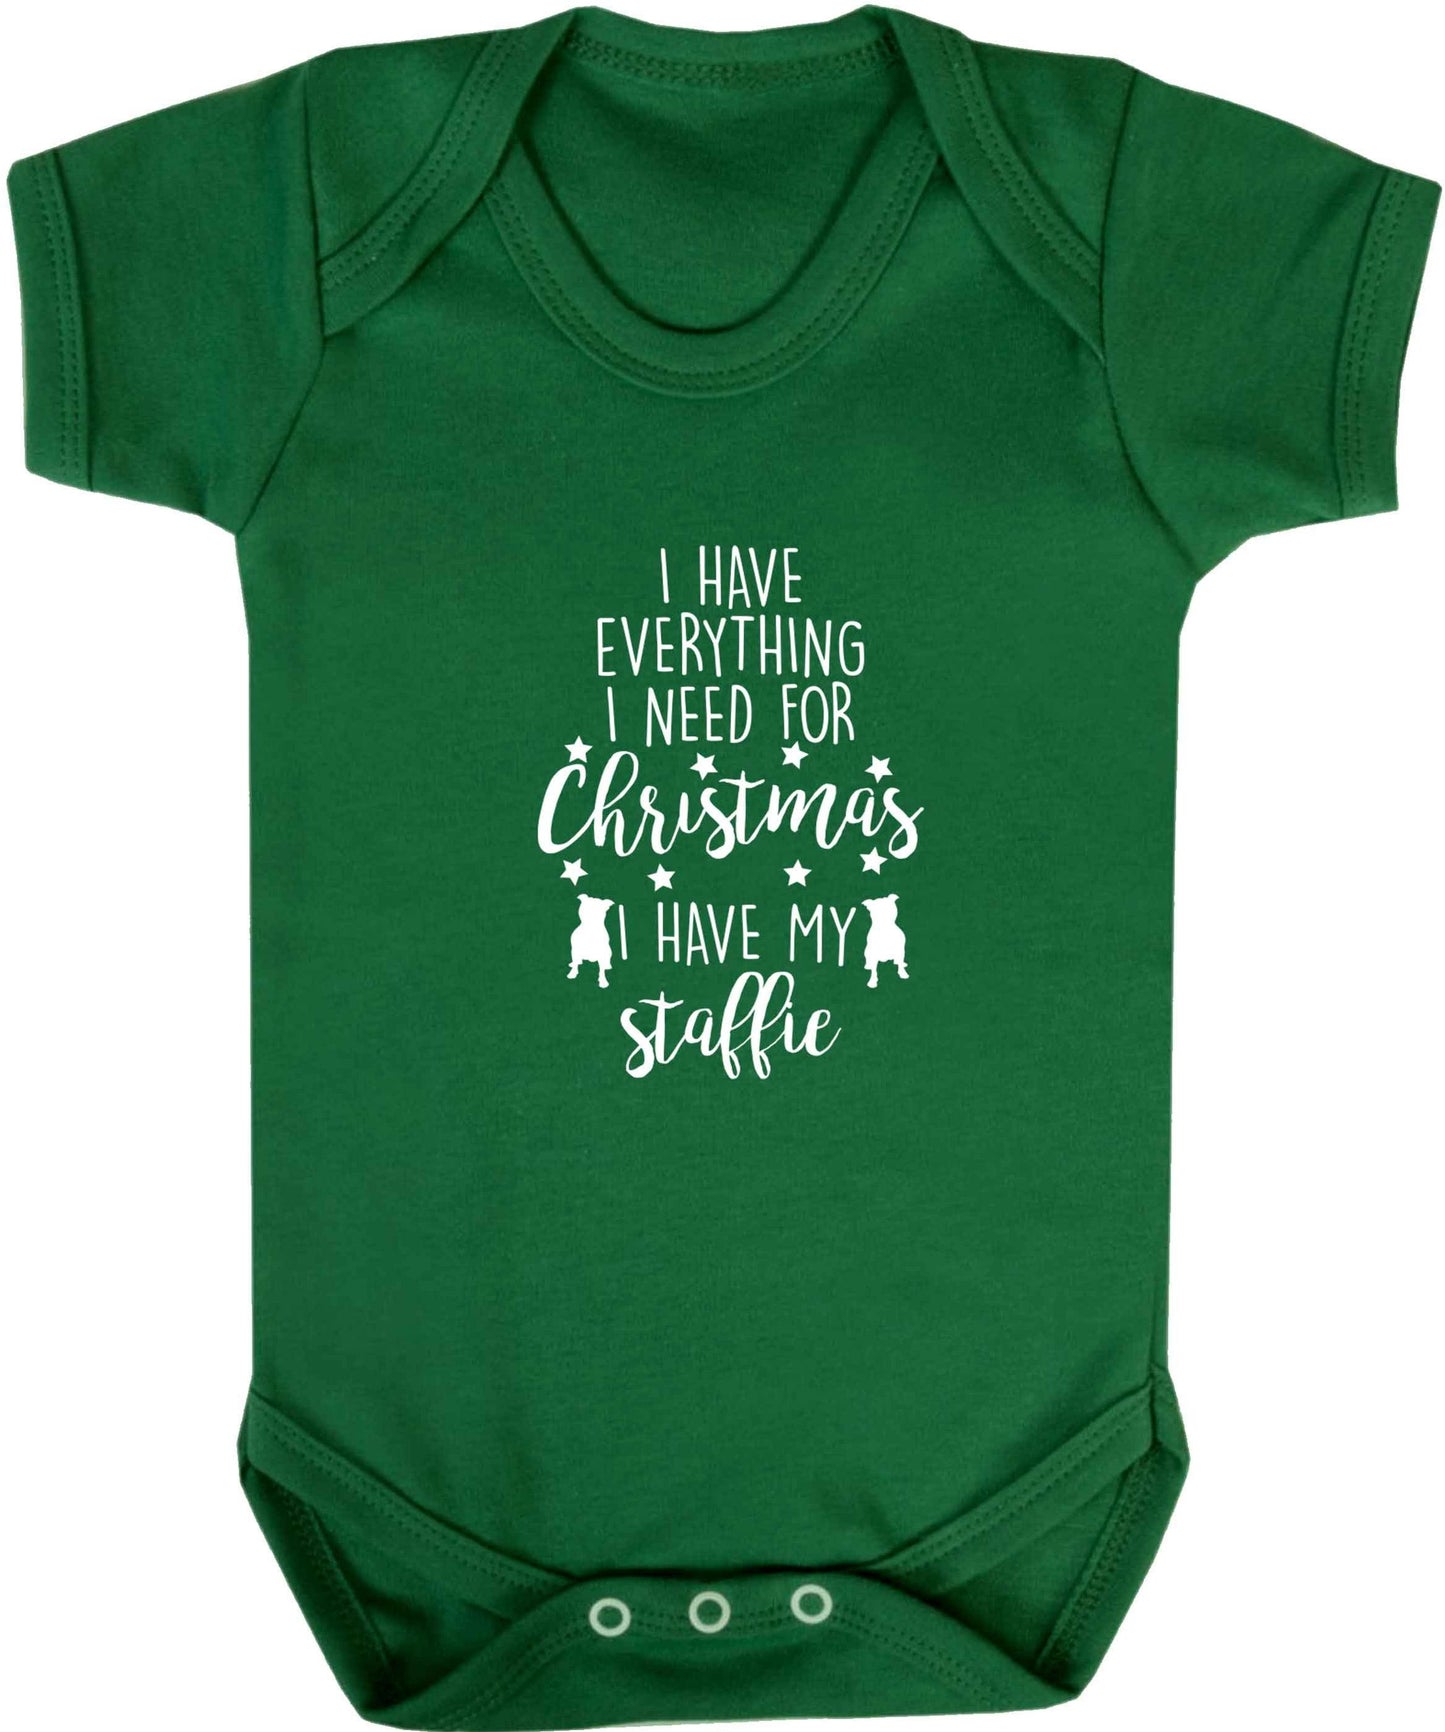 I have everything I need for Christmas I have my staffie baby vest green 18-24 months